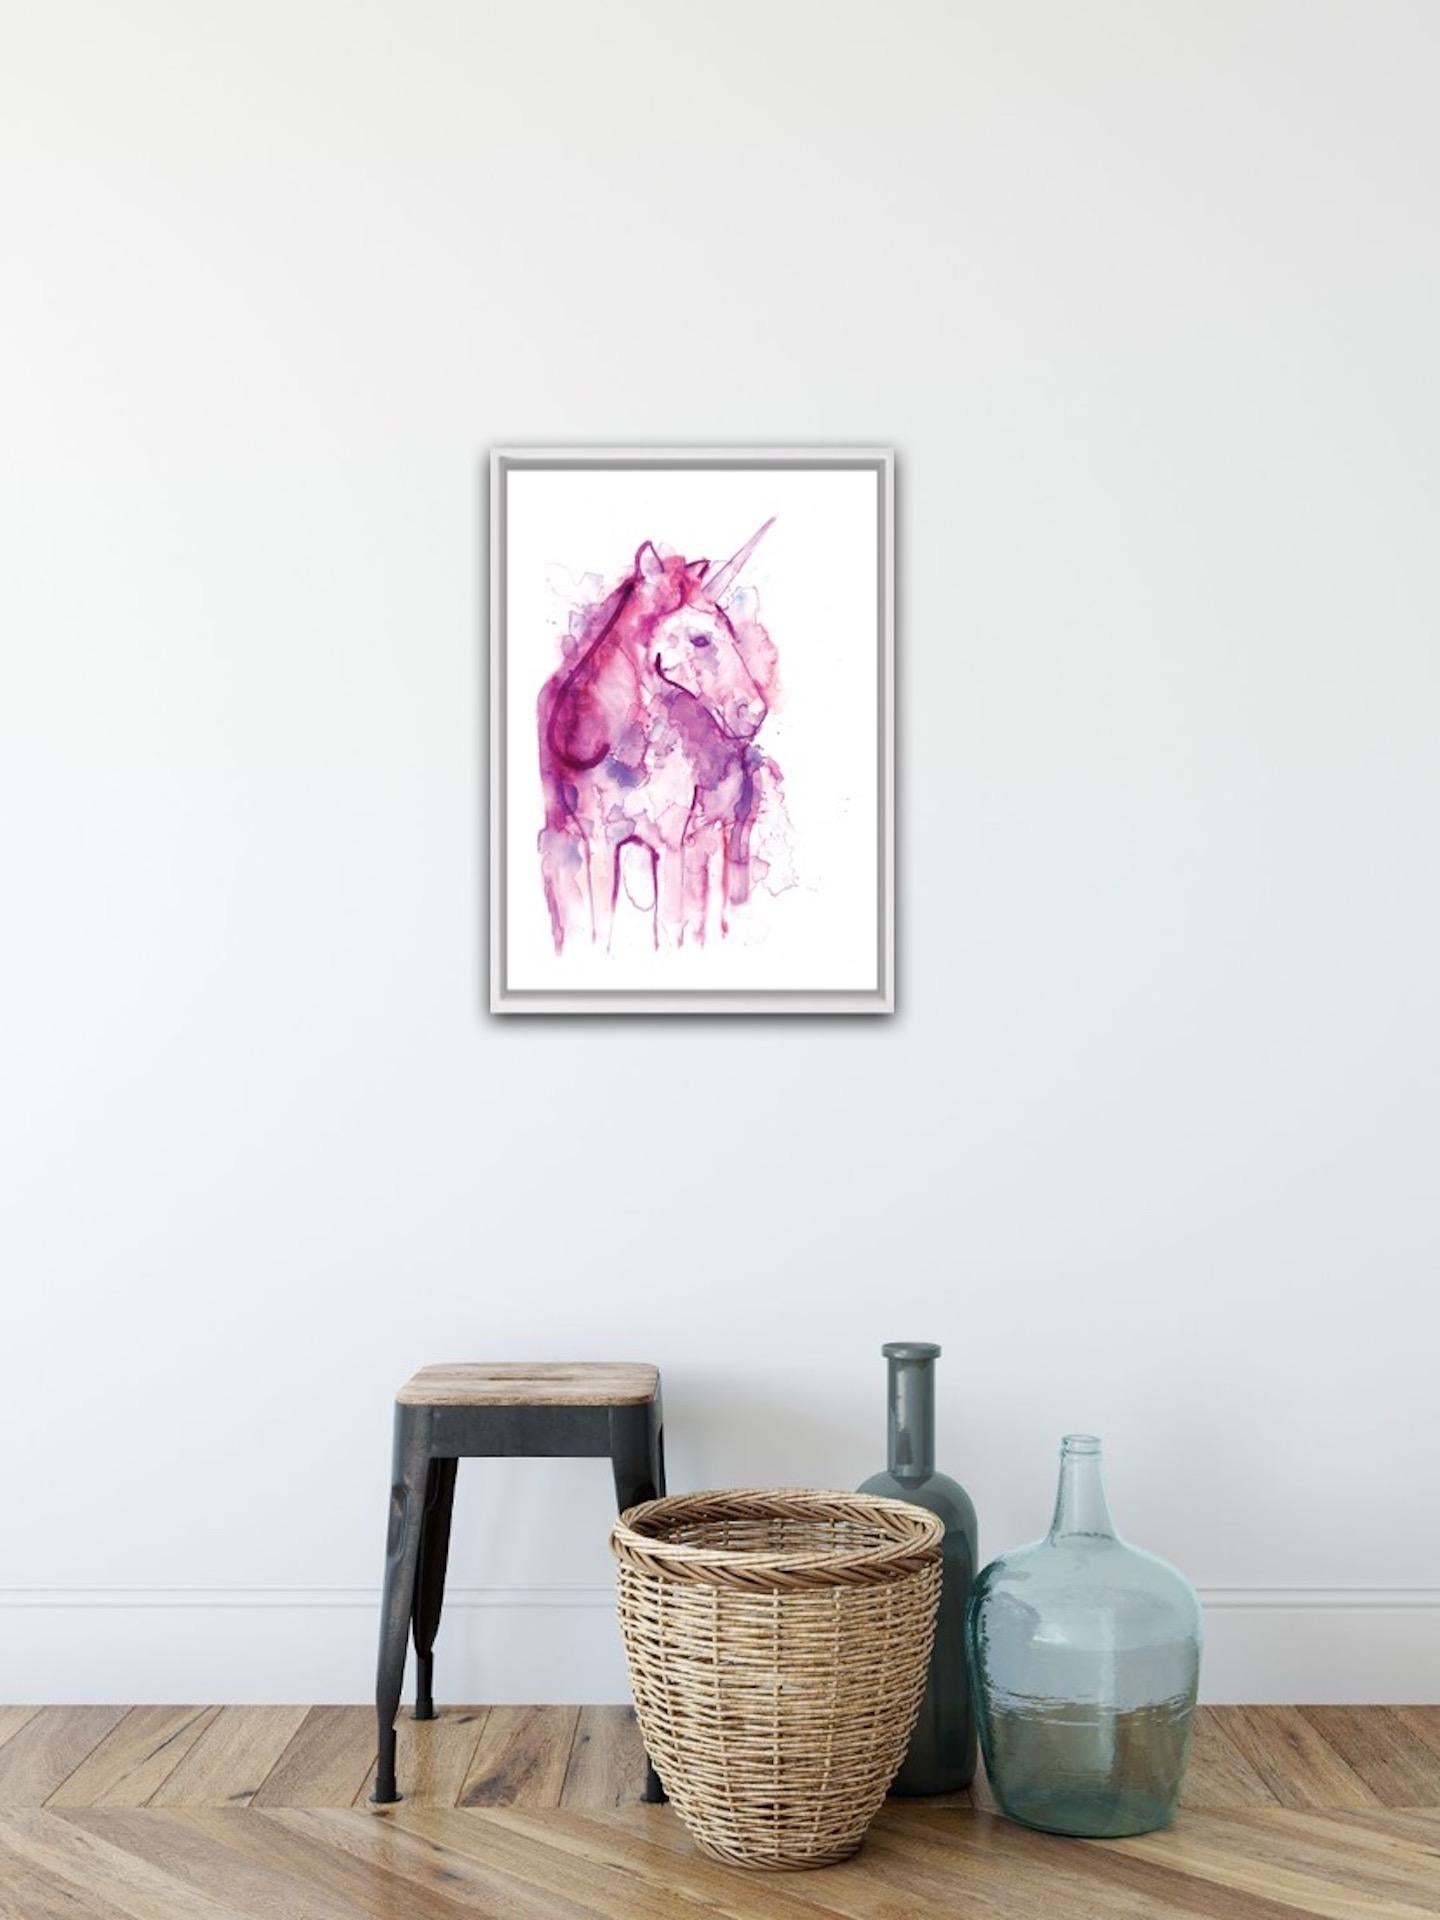 Gavin Dobson, Unicorn, Limited Edition Screen Print, Animal Art for Sale Online For Sale 1